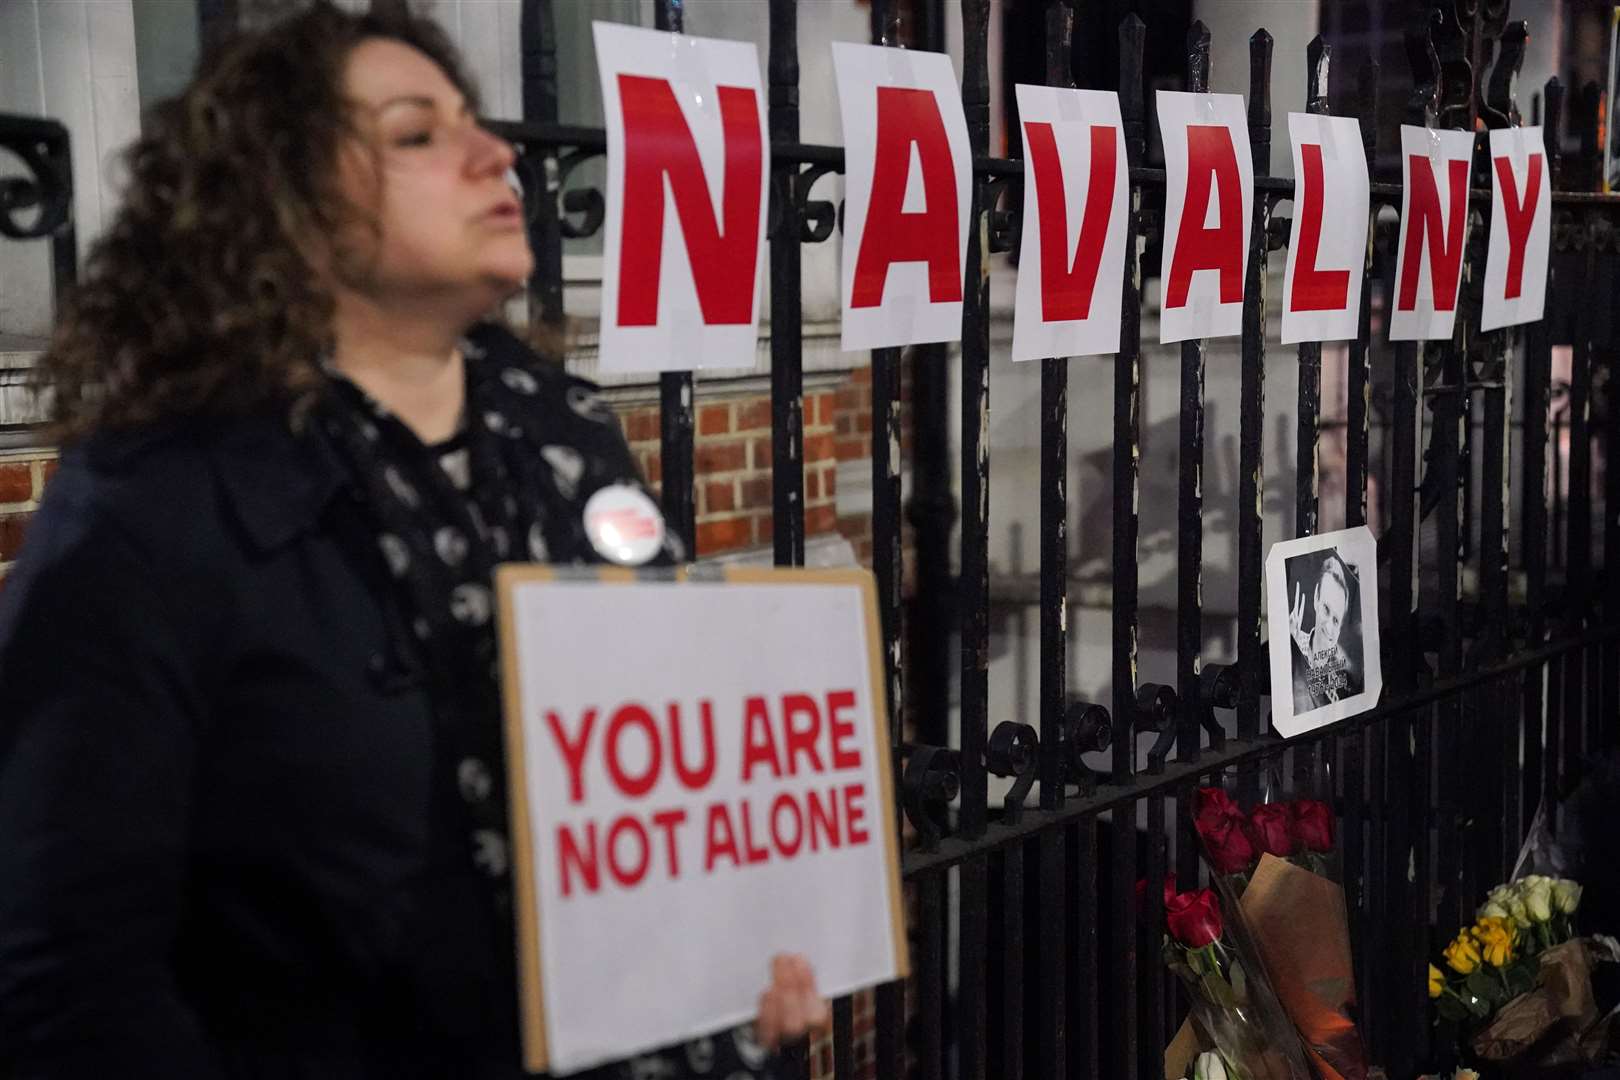 People take part in a protest opposite the Russian Embassy in London (Jonathan Brady/PA)